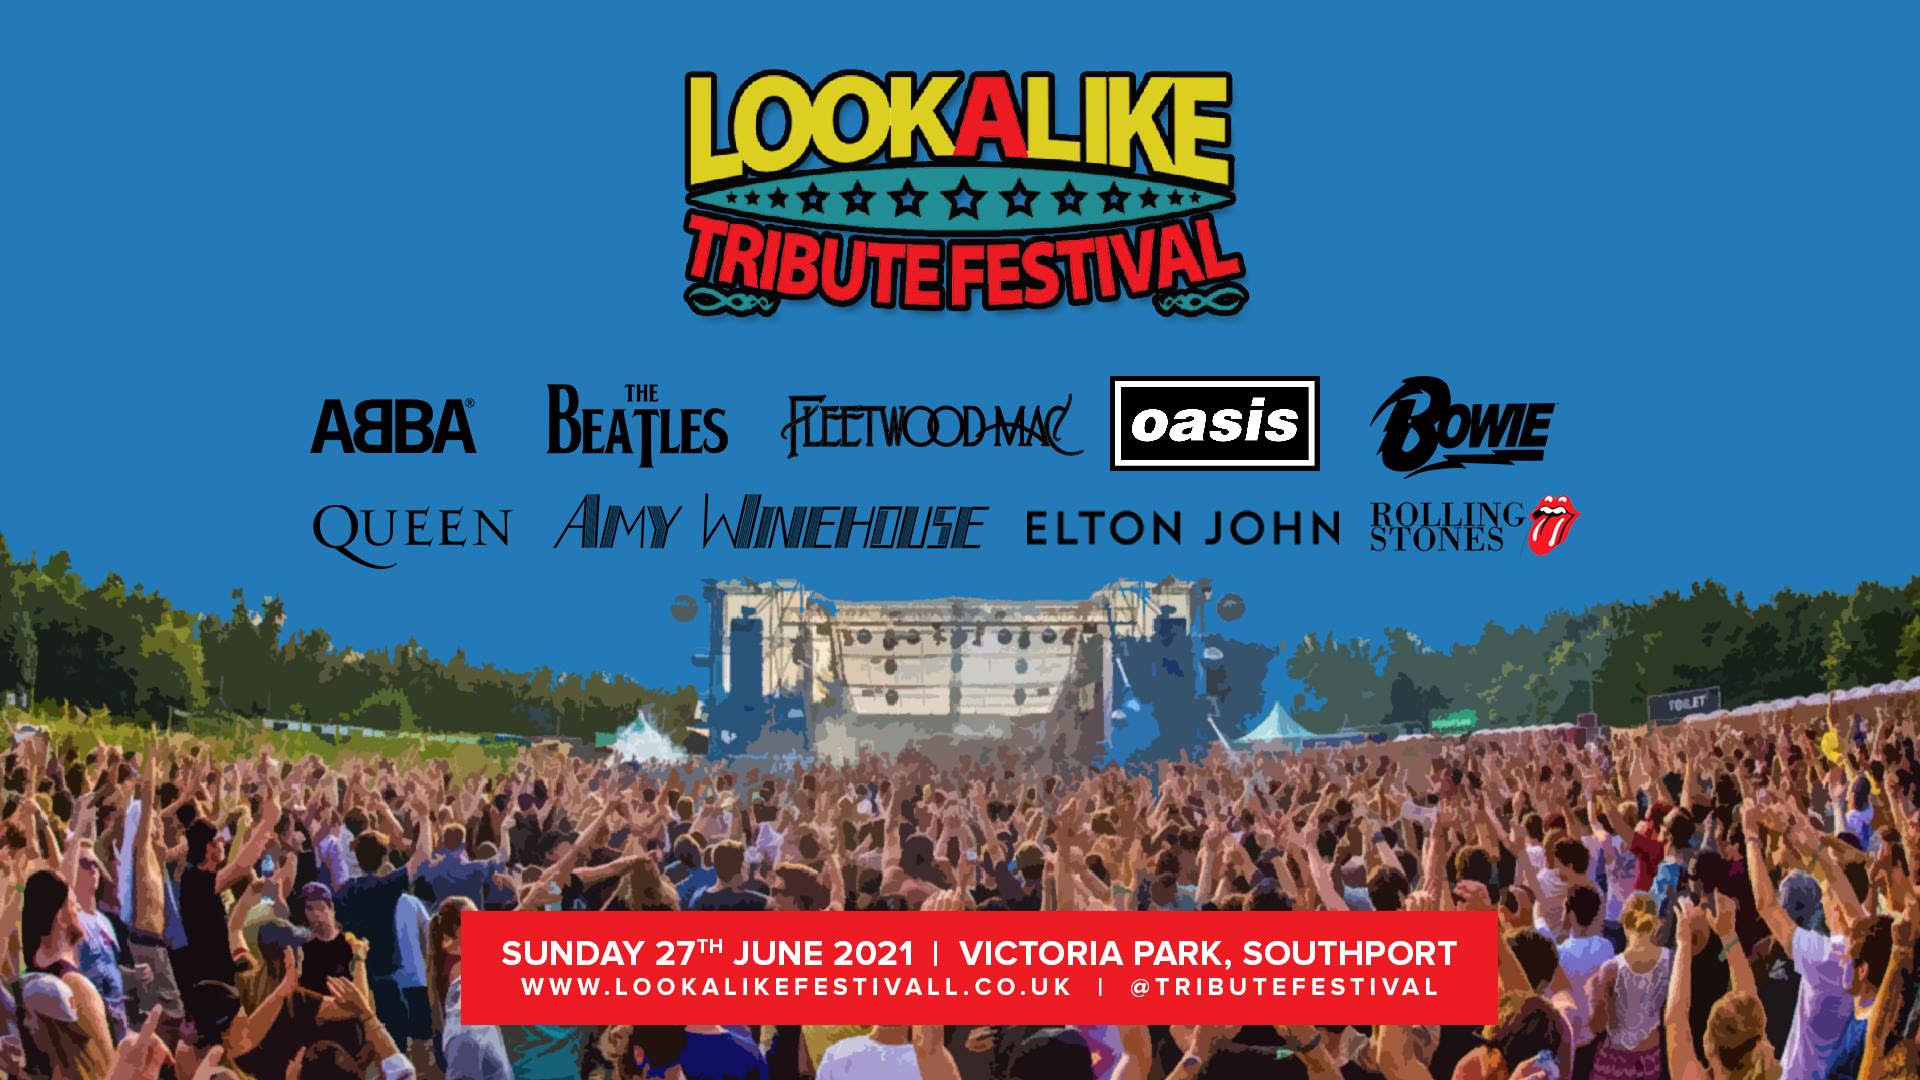 Lineup for lookalike tribute festival